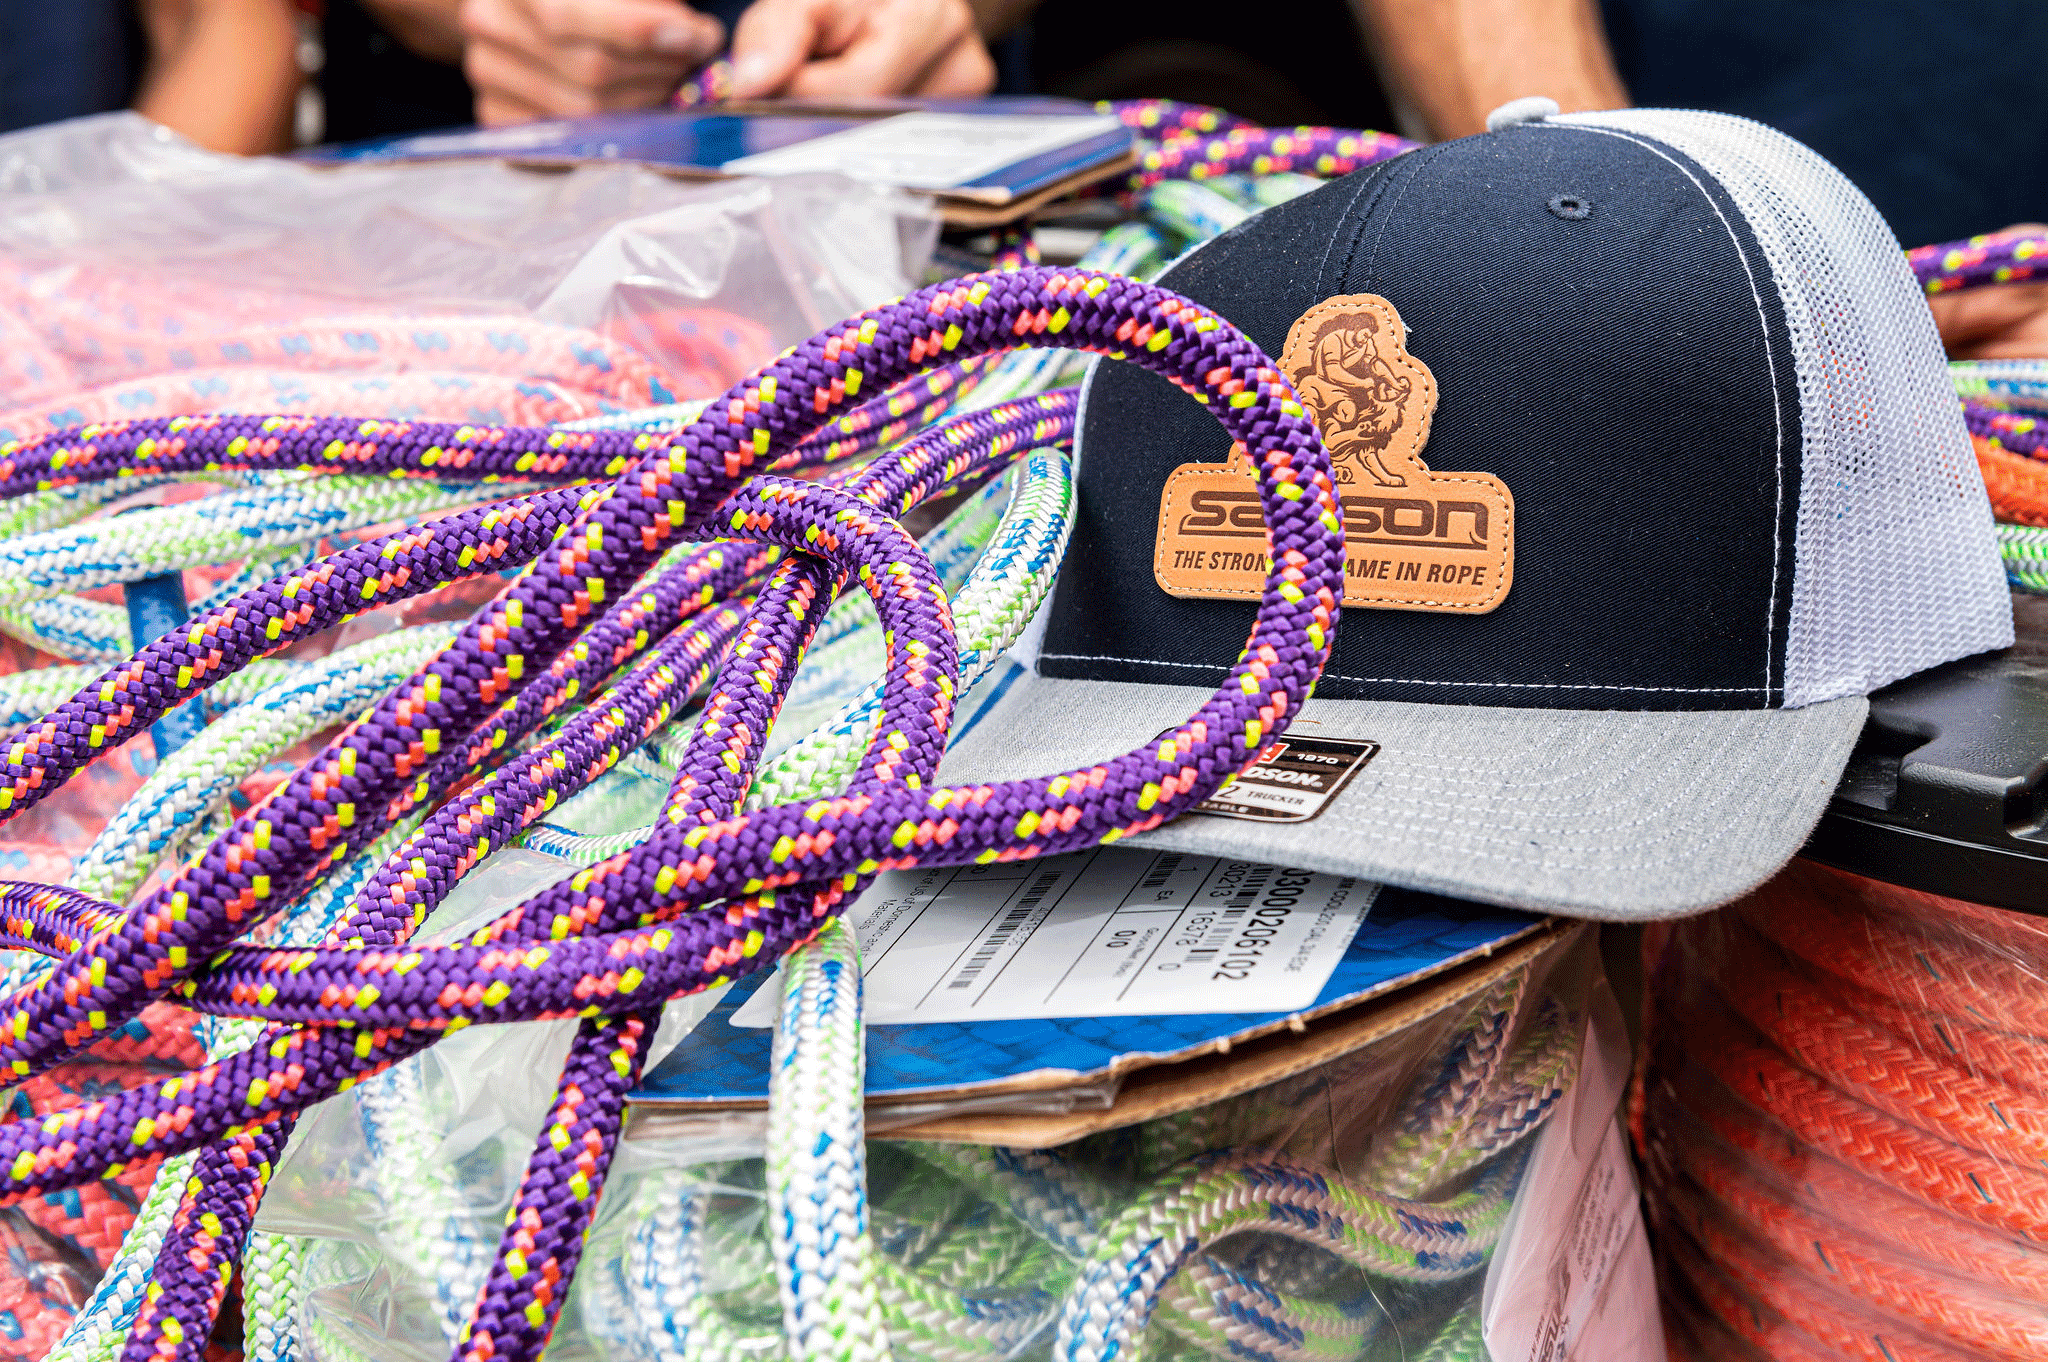 Samson hat and ropes